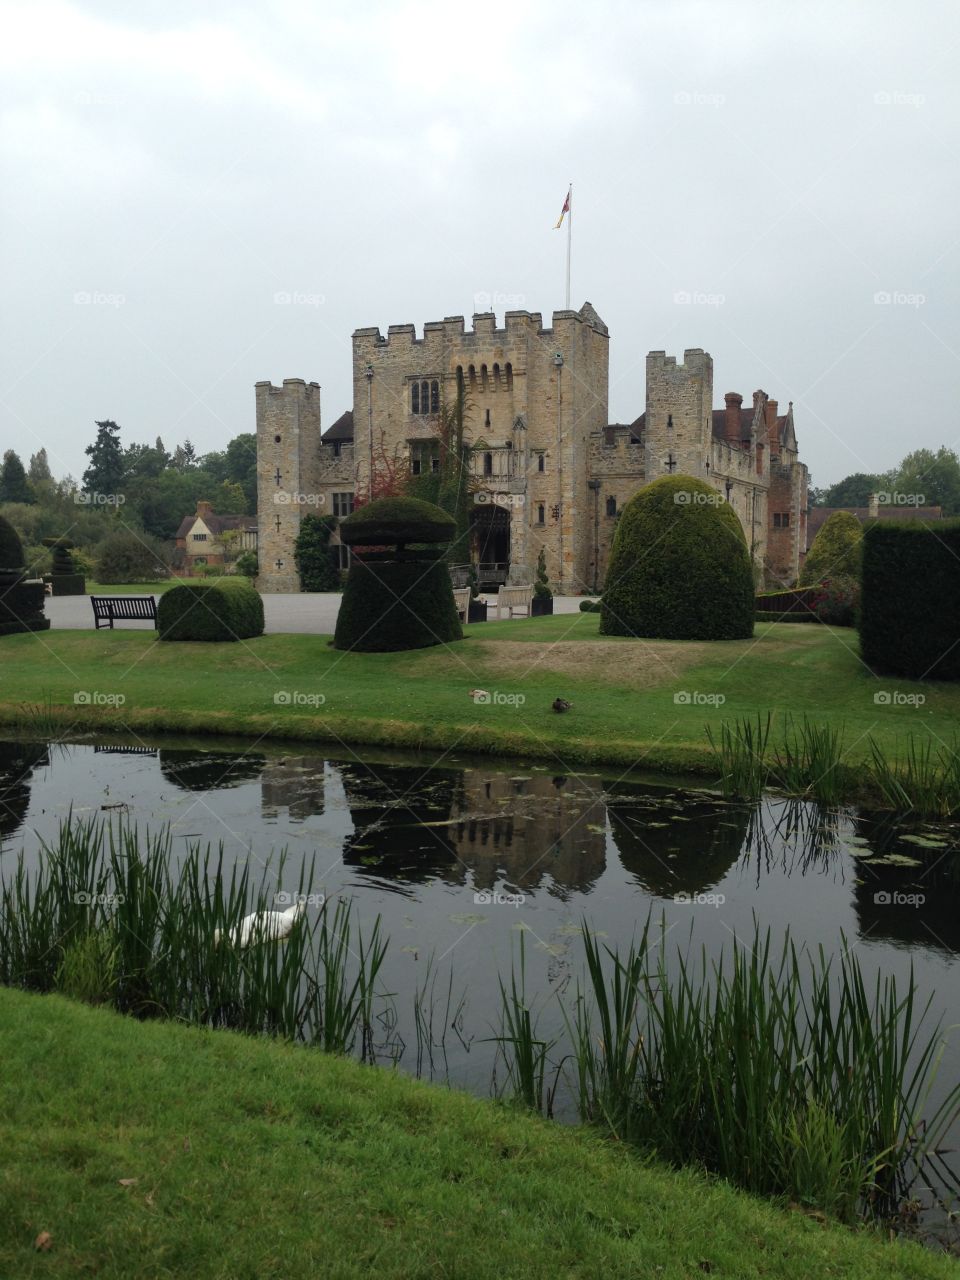 Front of Hever Castle from across the lake. Hever is situated in Kent , United Kingdom & is the ancestral home to Queen Ann Boleyn 2nd wife to King Henry V111